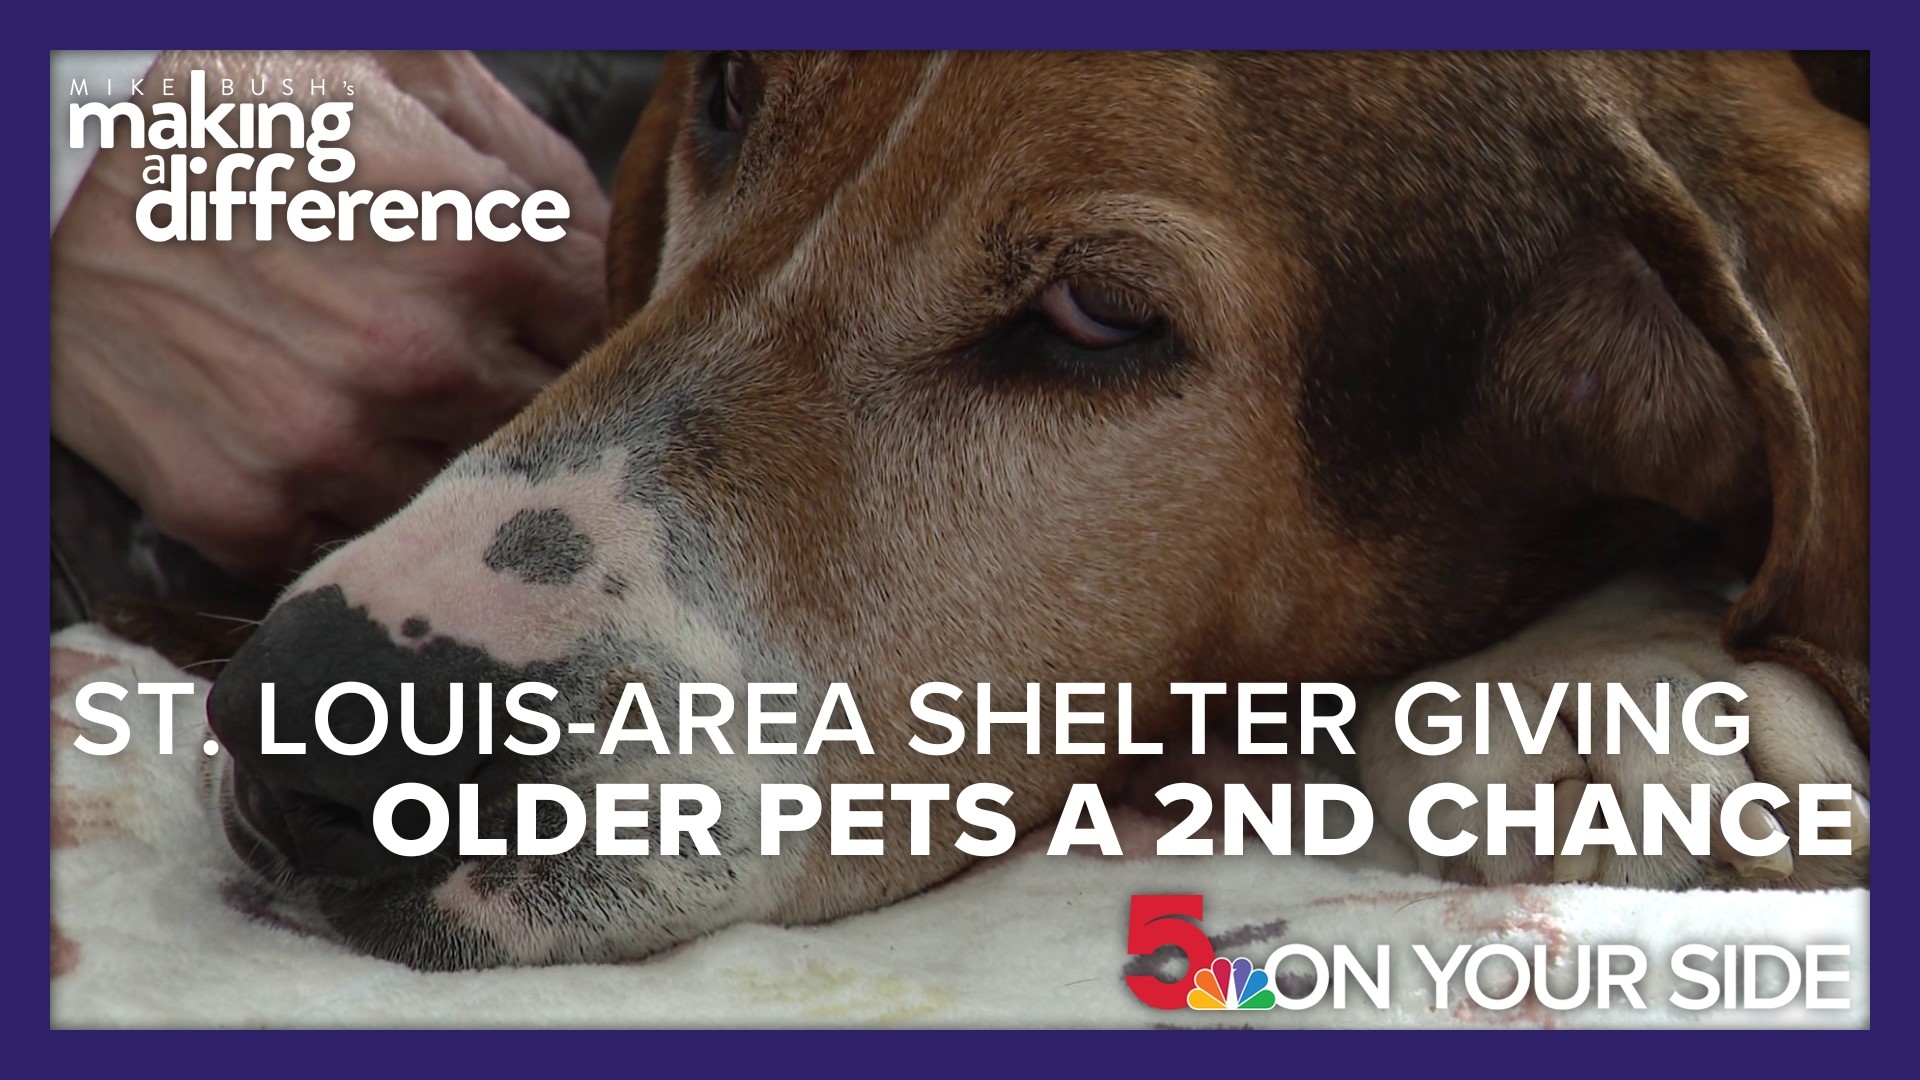 The Second Chance Ranch isn't just a shelter. It's a haven for senior dogs and cats who've faced hardship, abandonment or the loss of their human companions.